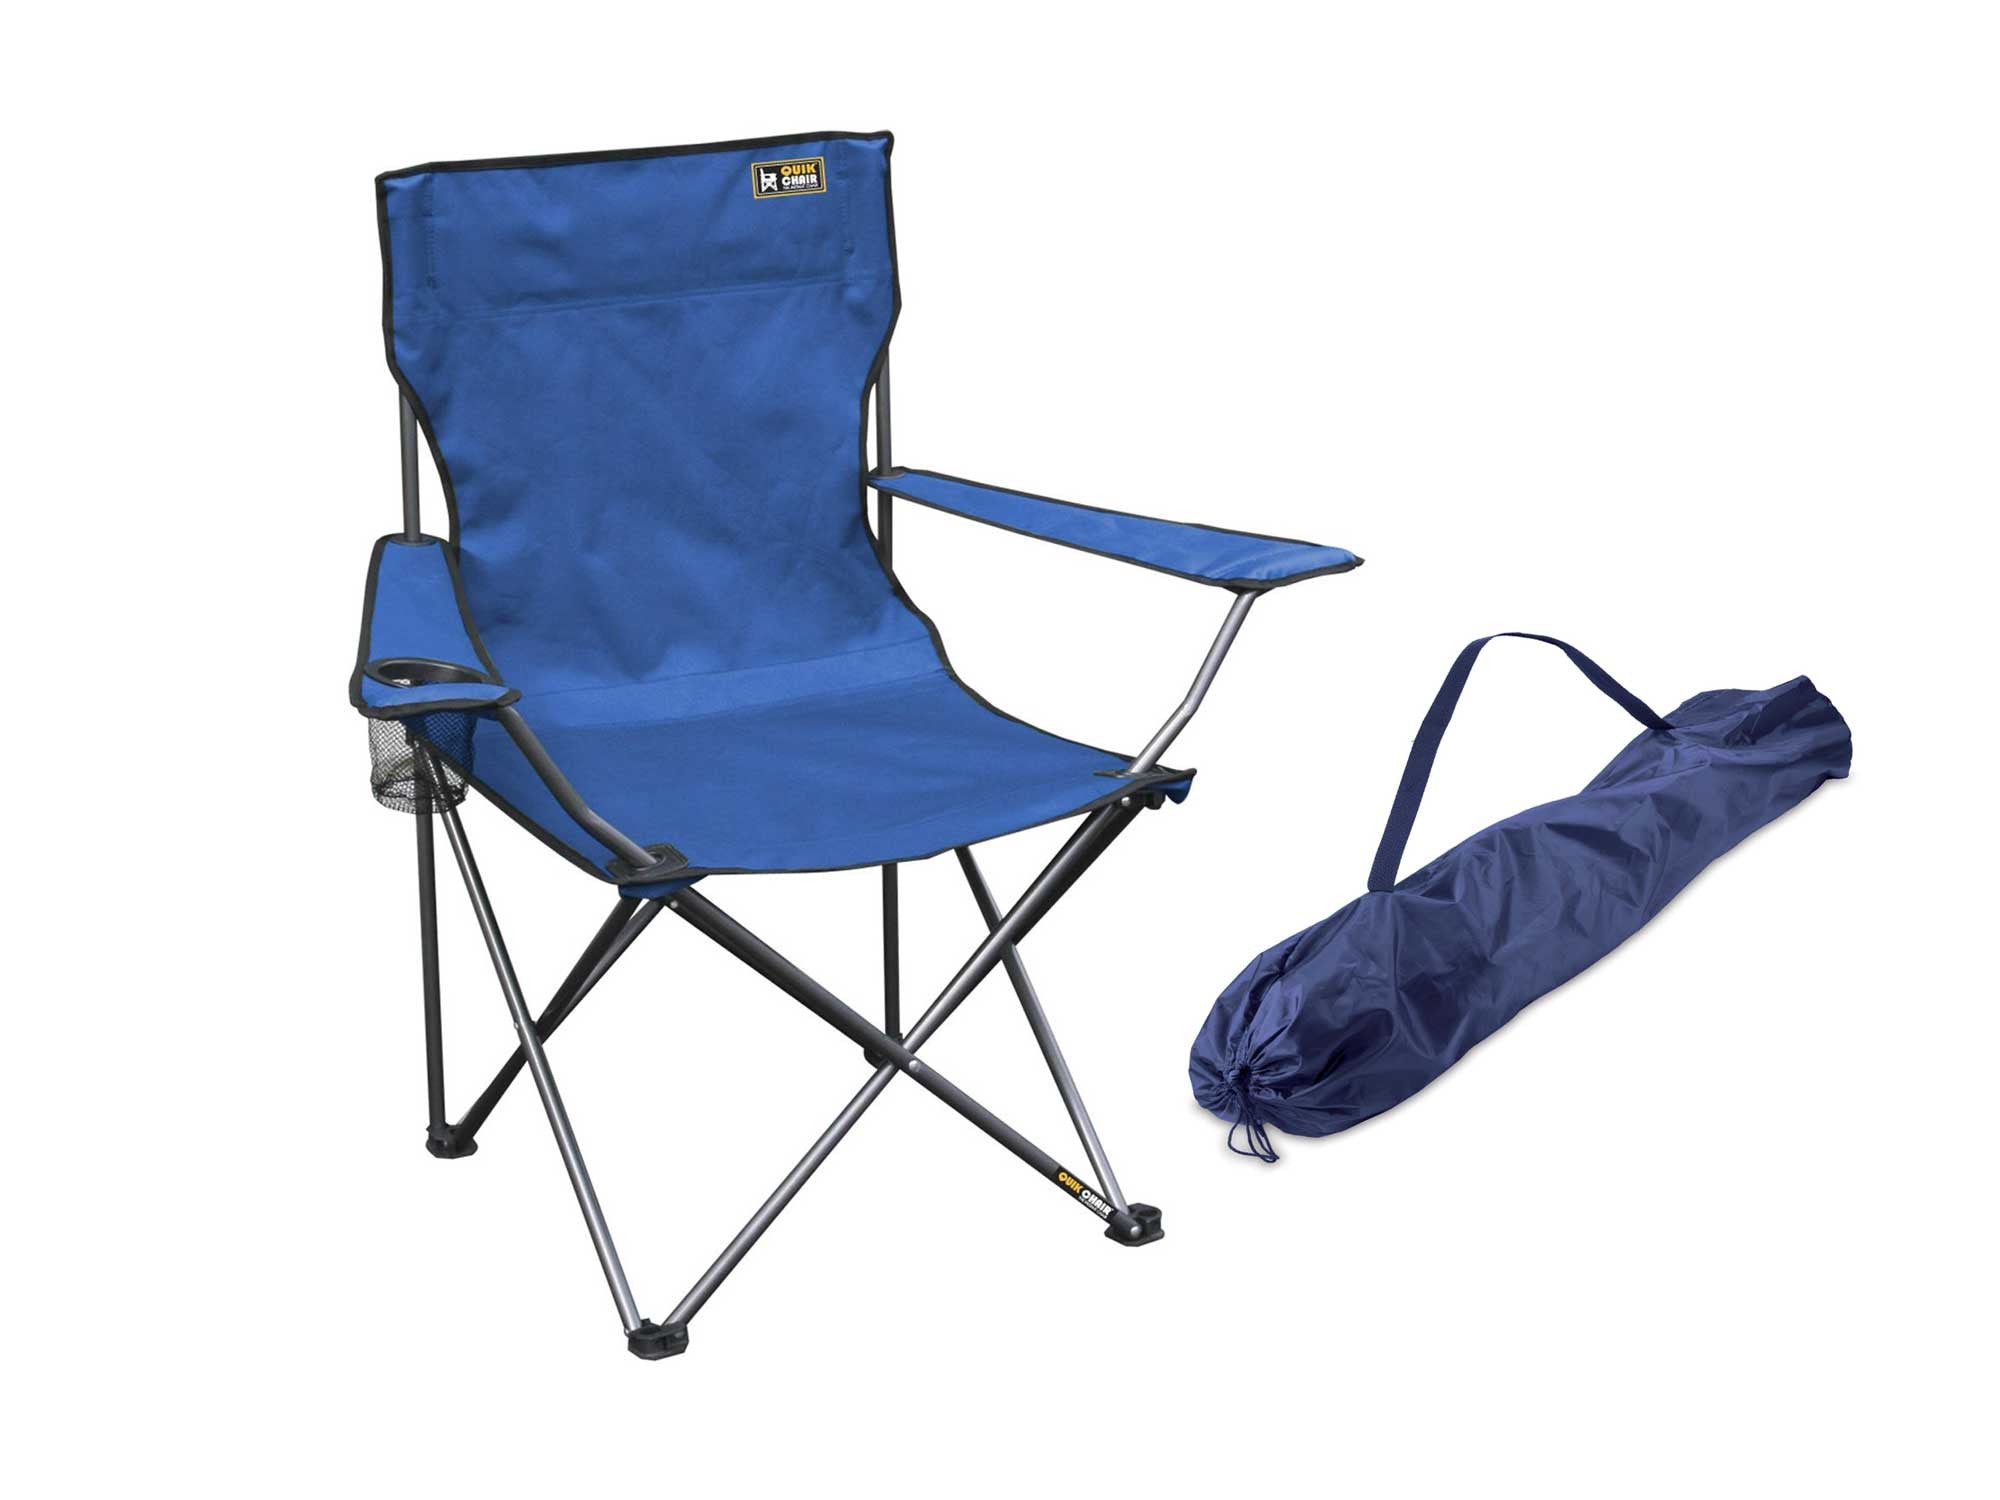 Iceland - Folding Camping chair for rent in Reykjavik - Iceland Camping